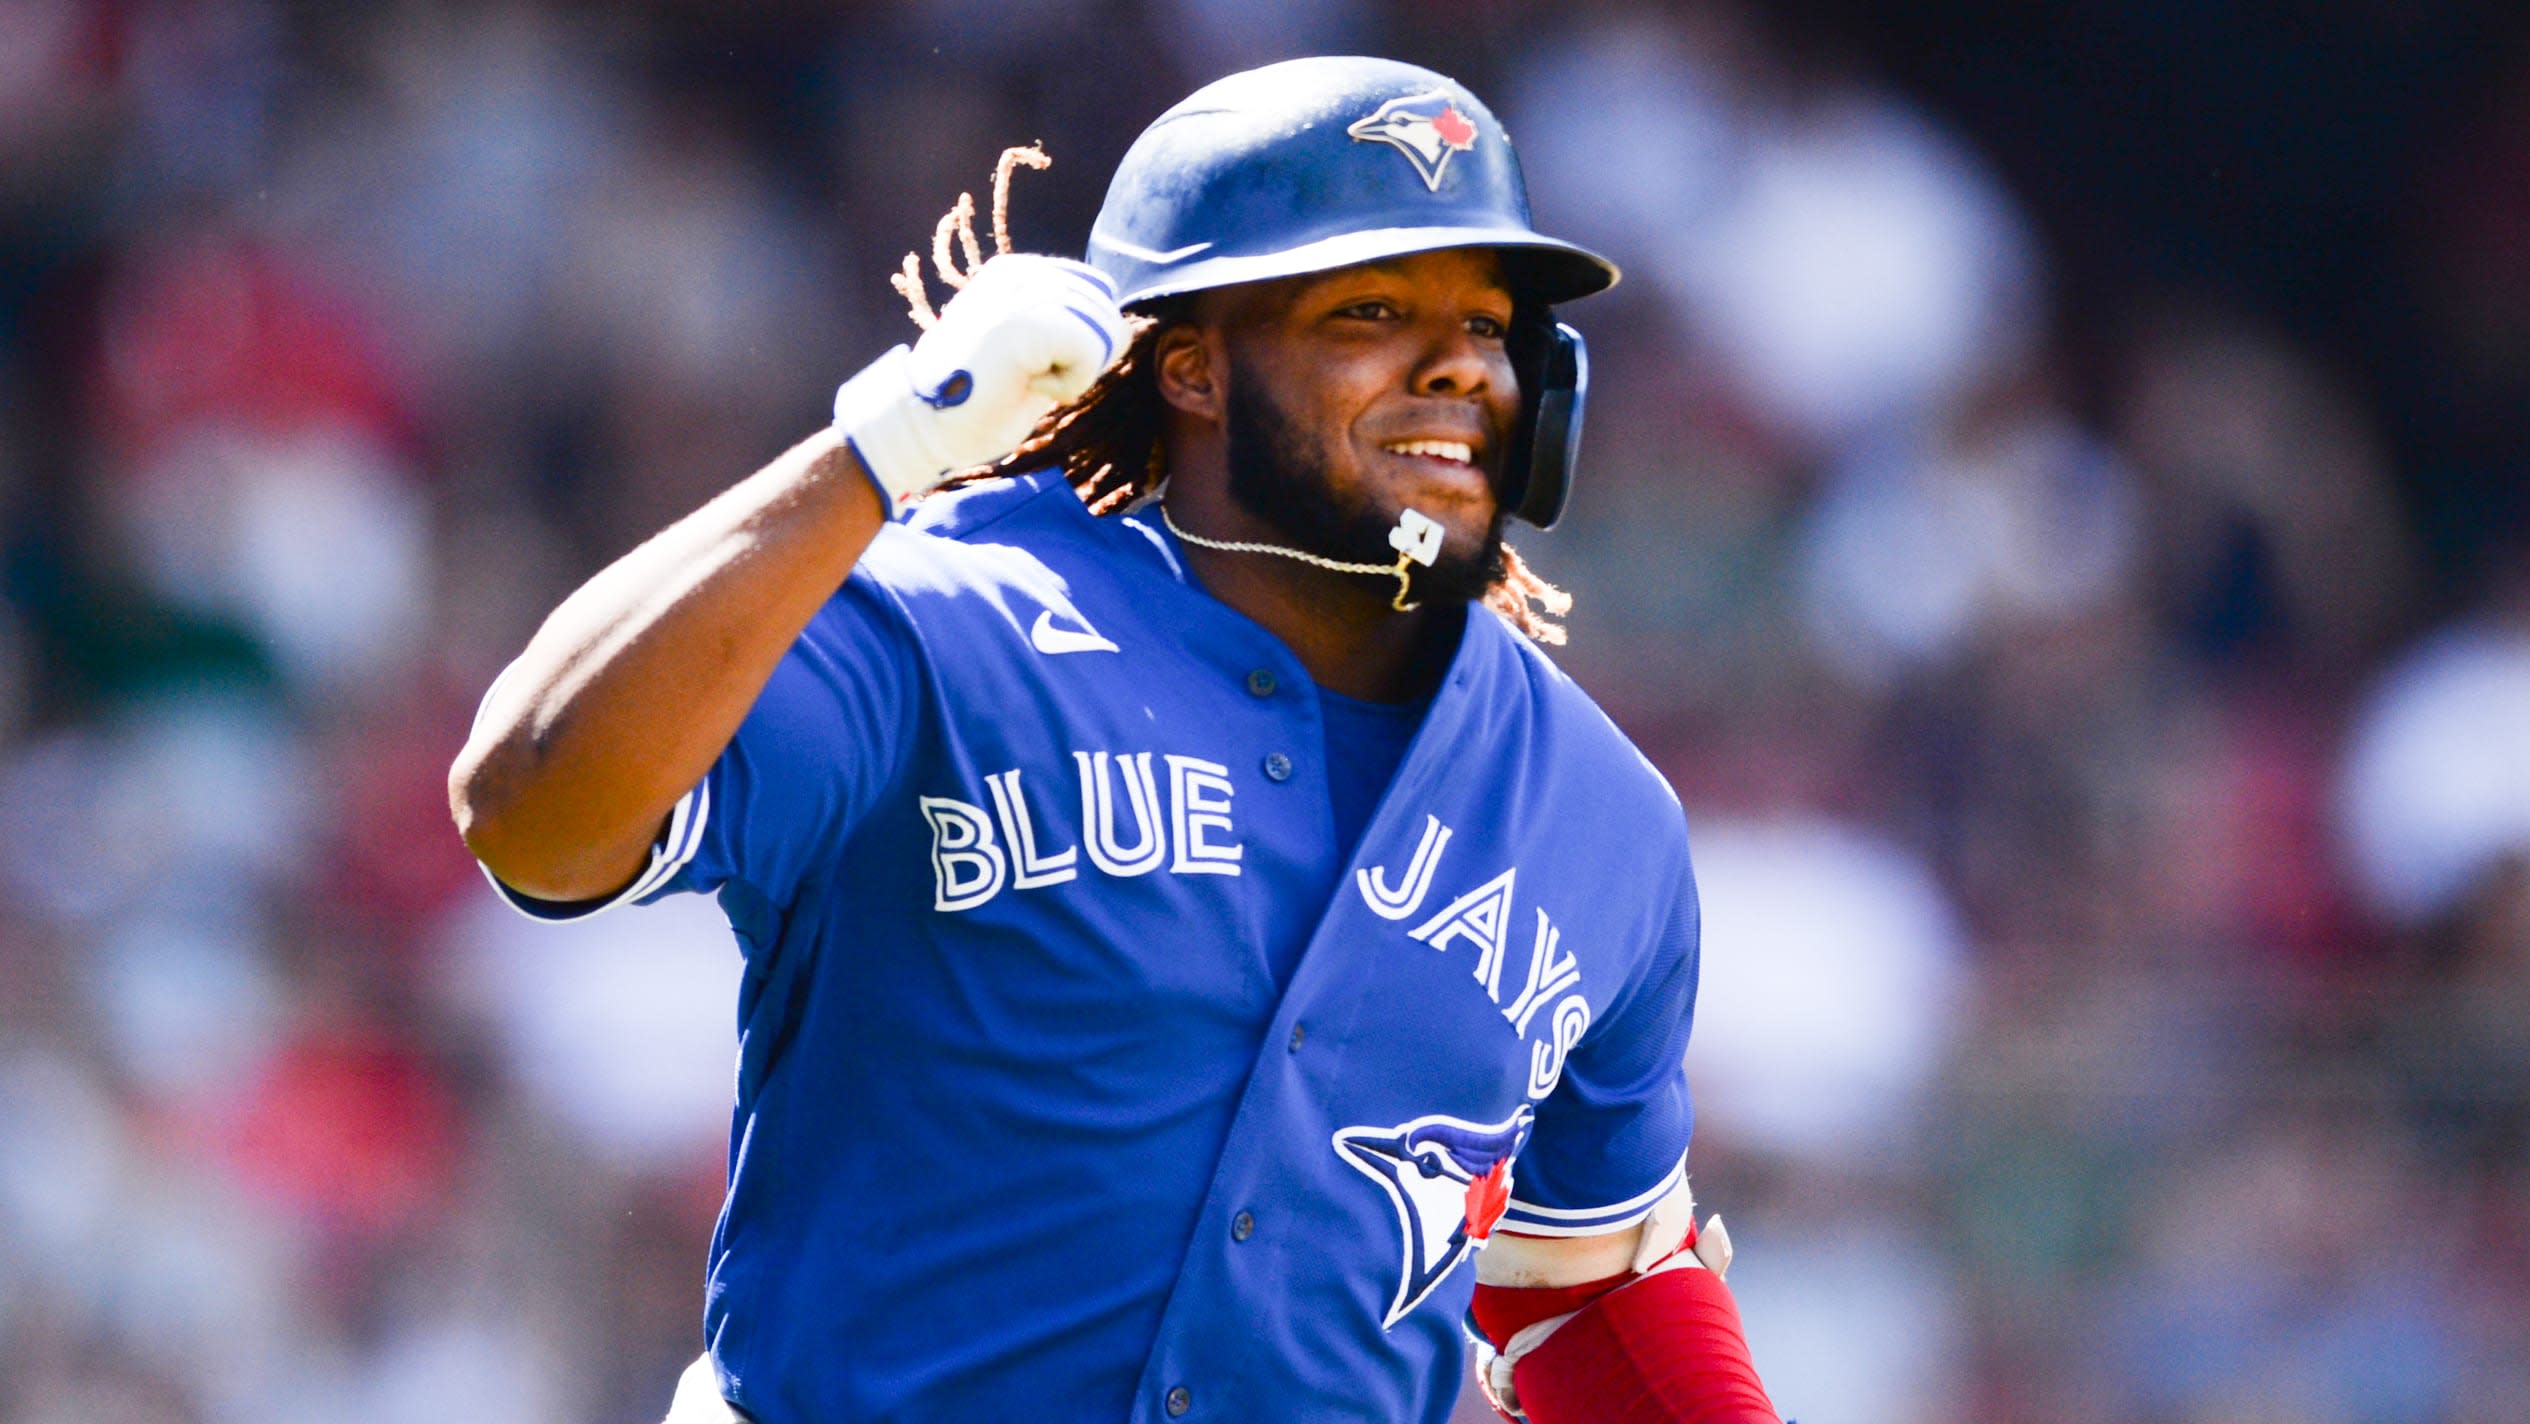 Blue Jays slugger Guerrero named MVP as AL rolls to 5-2 win in MLB All-Star  Game - Vancouver Island Free Daily